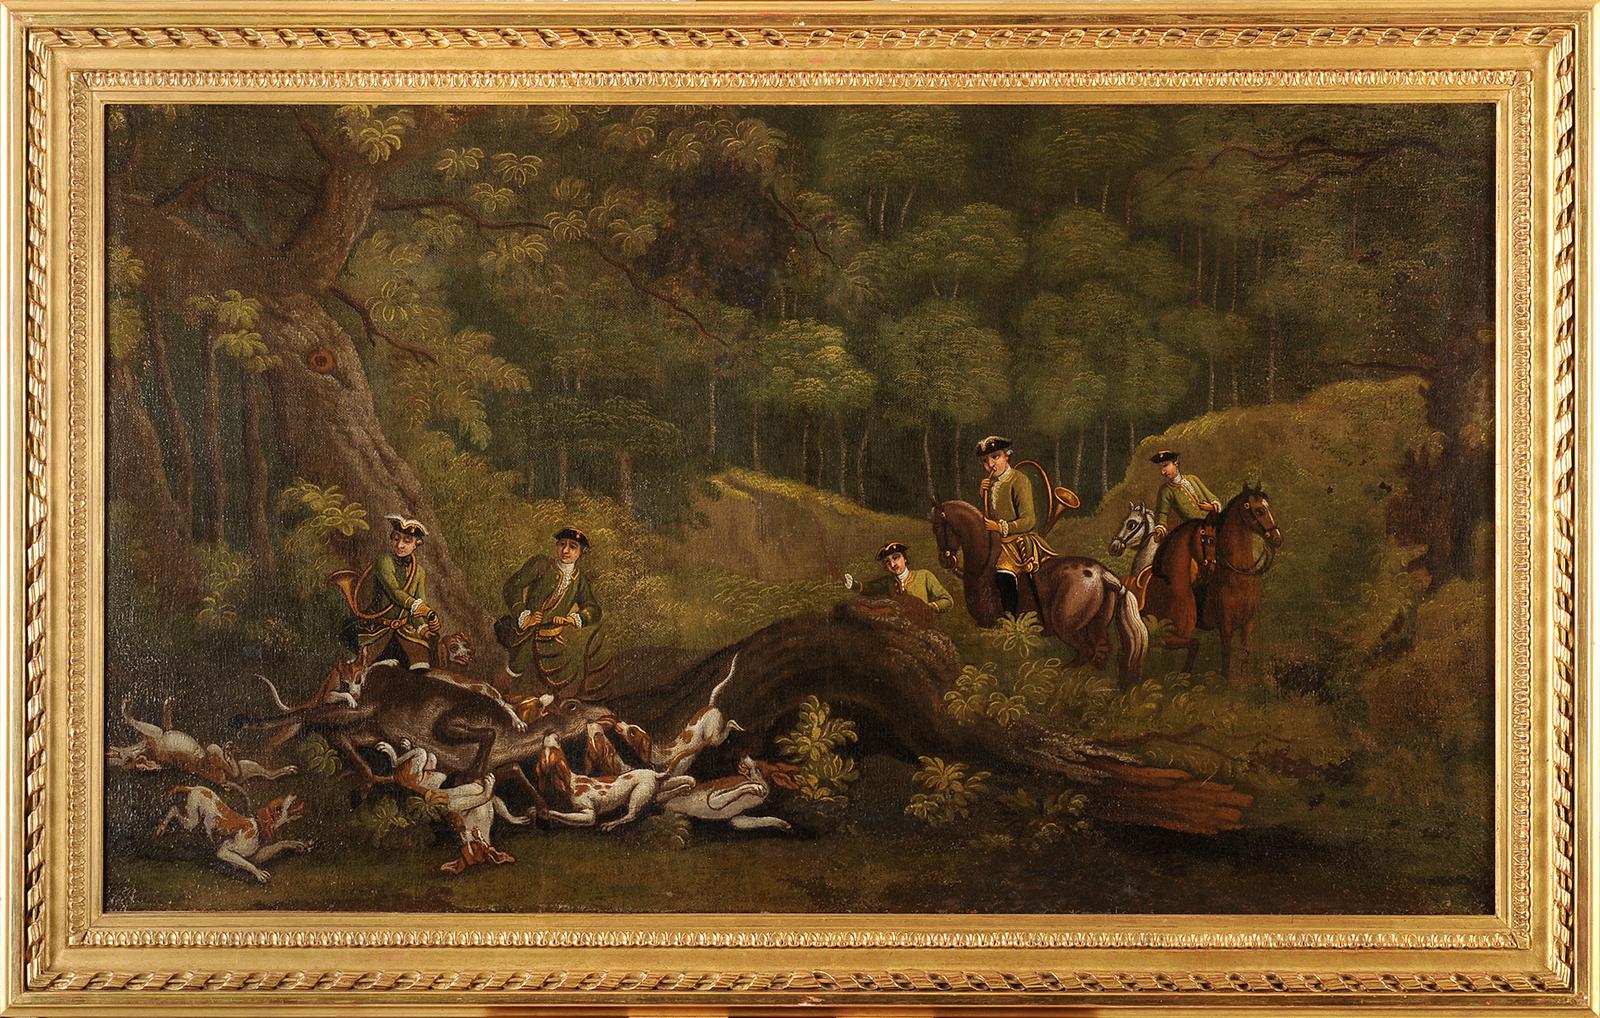 French school 18th century - Deer hunting scene in France